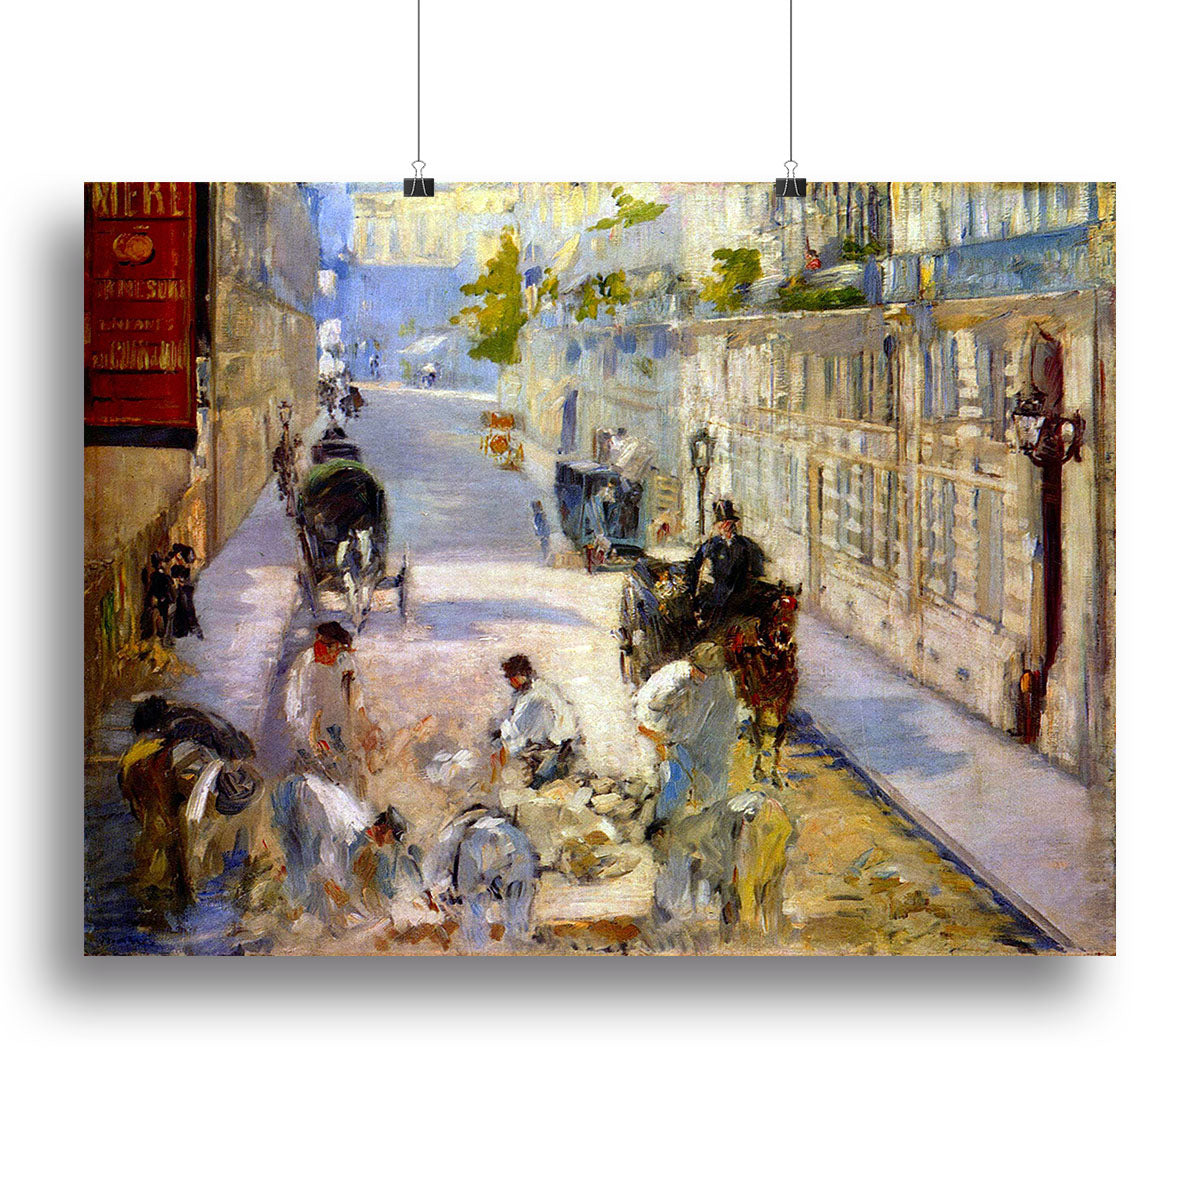 Road workers rue de Berne by Manet Canvas Print or Poster - Canvas Art Rocks - 2